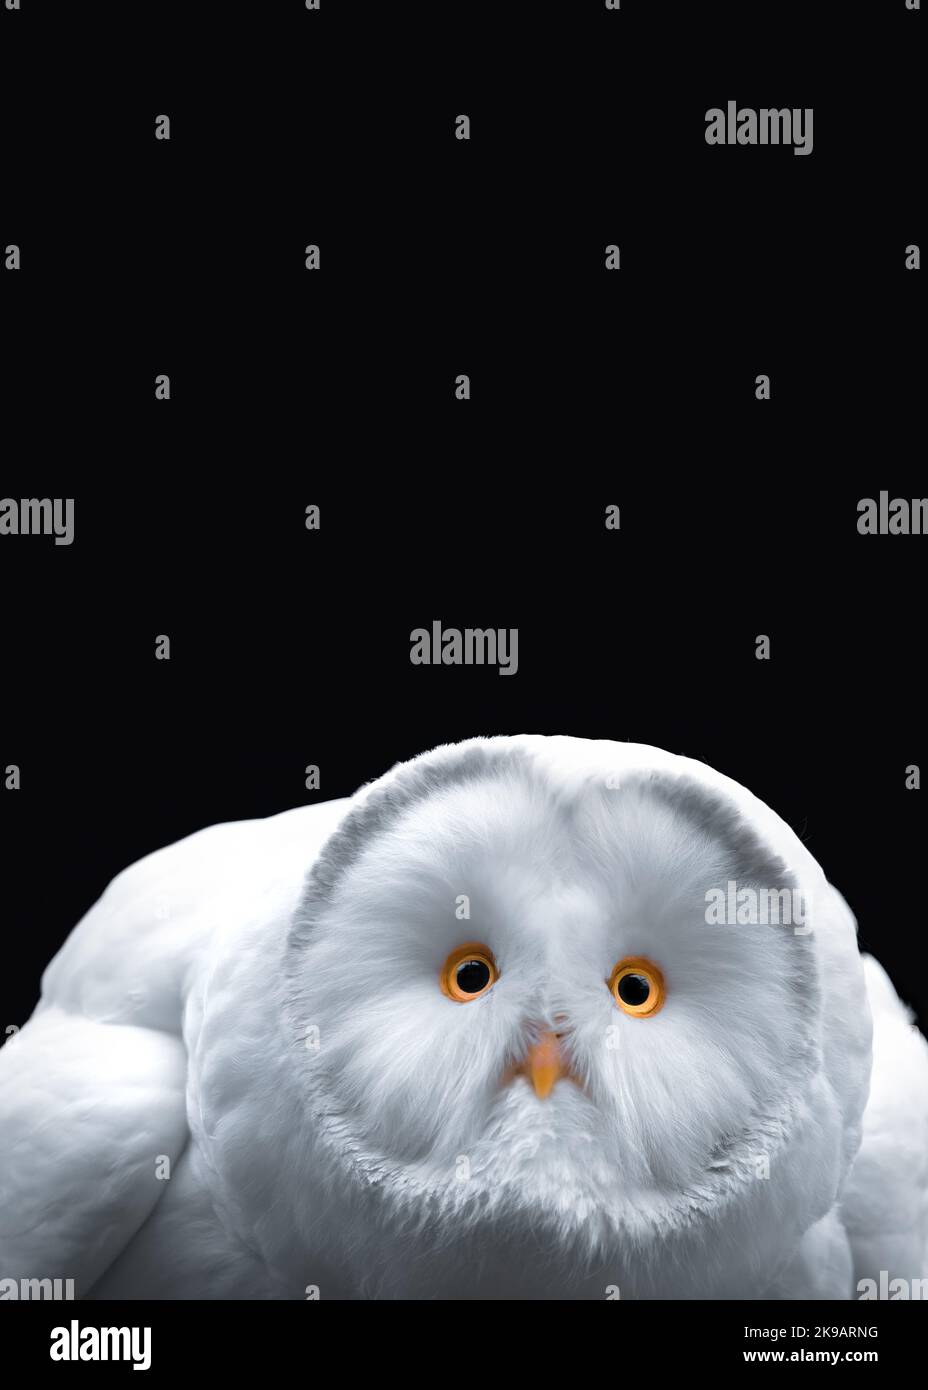 Close-up of a white owl with yellow eyes and beak, black background, minimalism, copy space, vertical Stock Photo